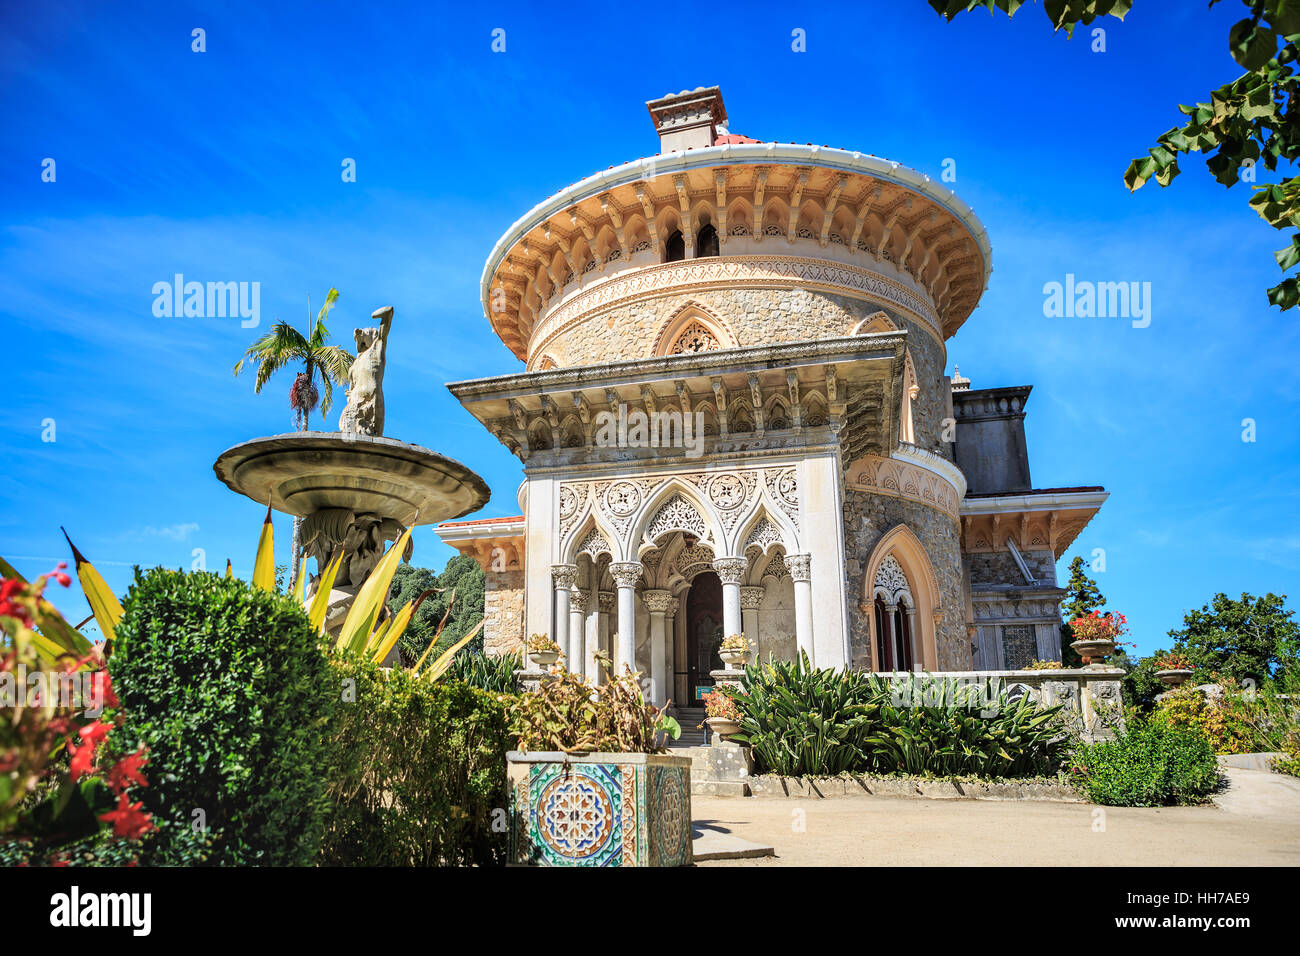 SINTRA, PORTUGAL - CIRCA OCTOBER, 2016: The Park and Palace of Monserrate in Sintra, Portugal Stock Photo